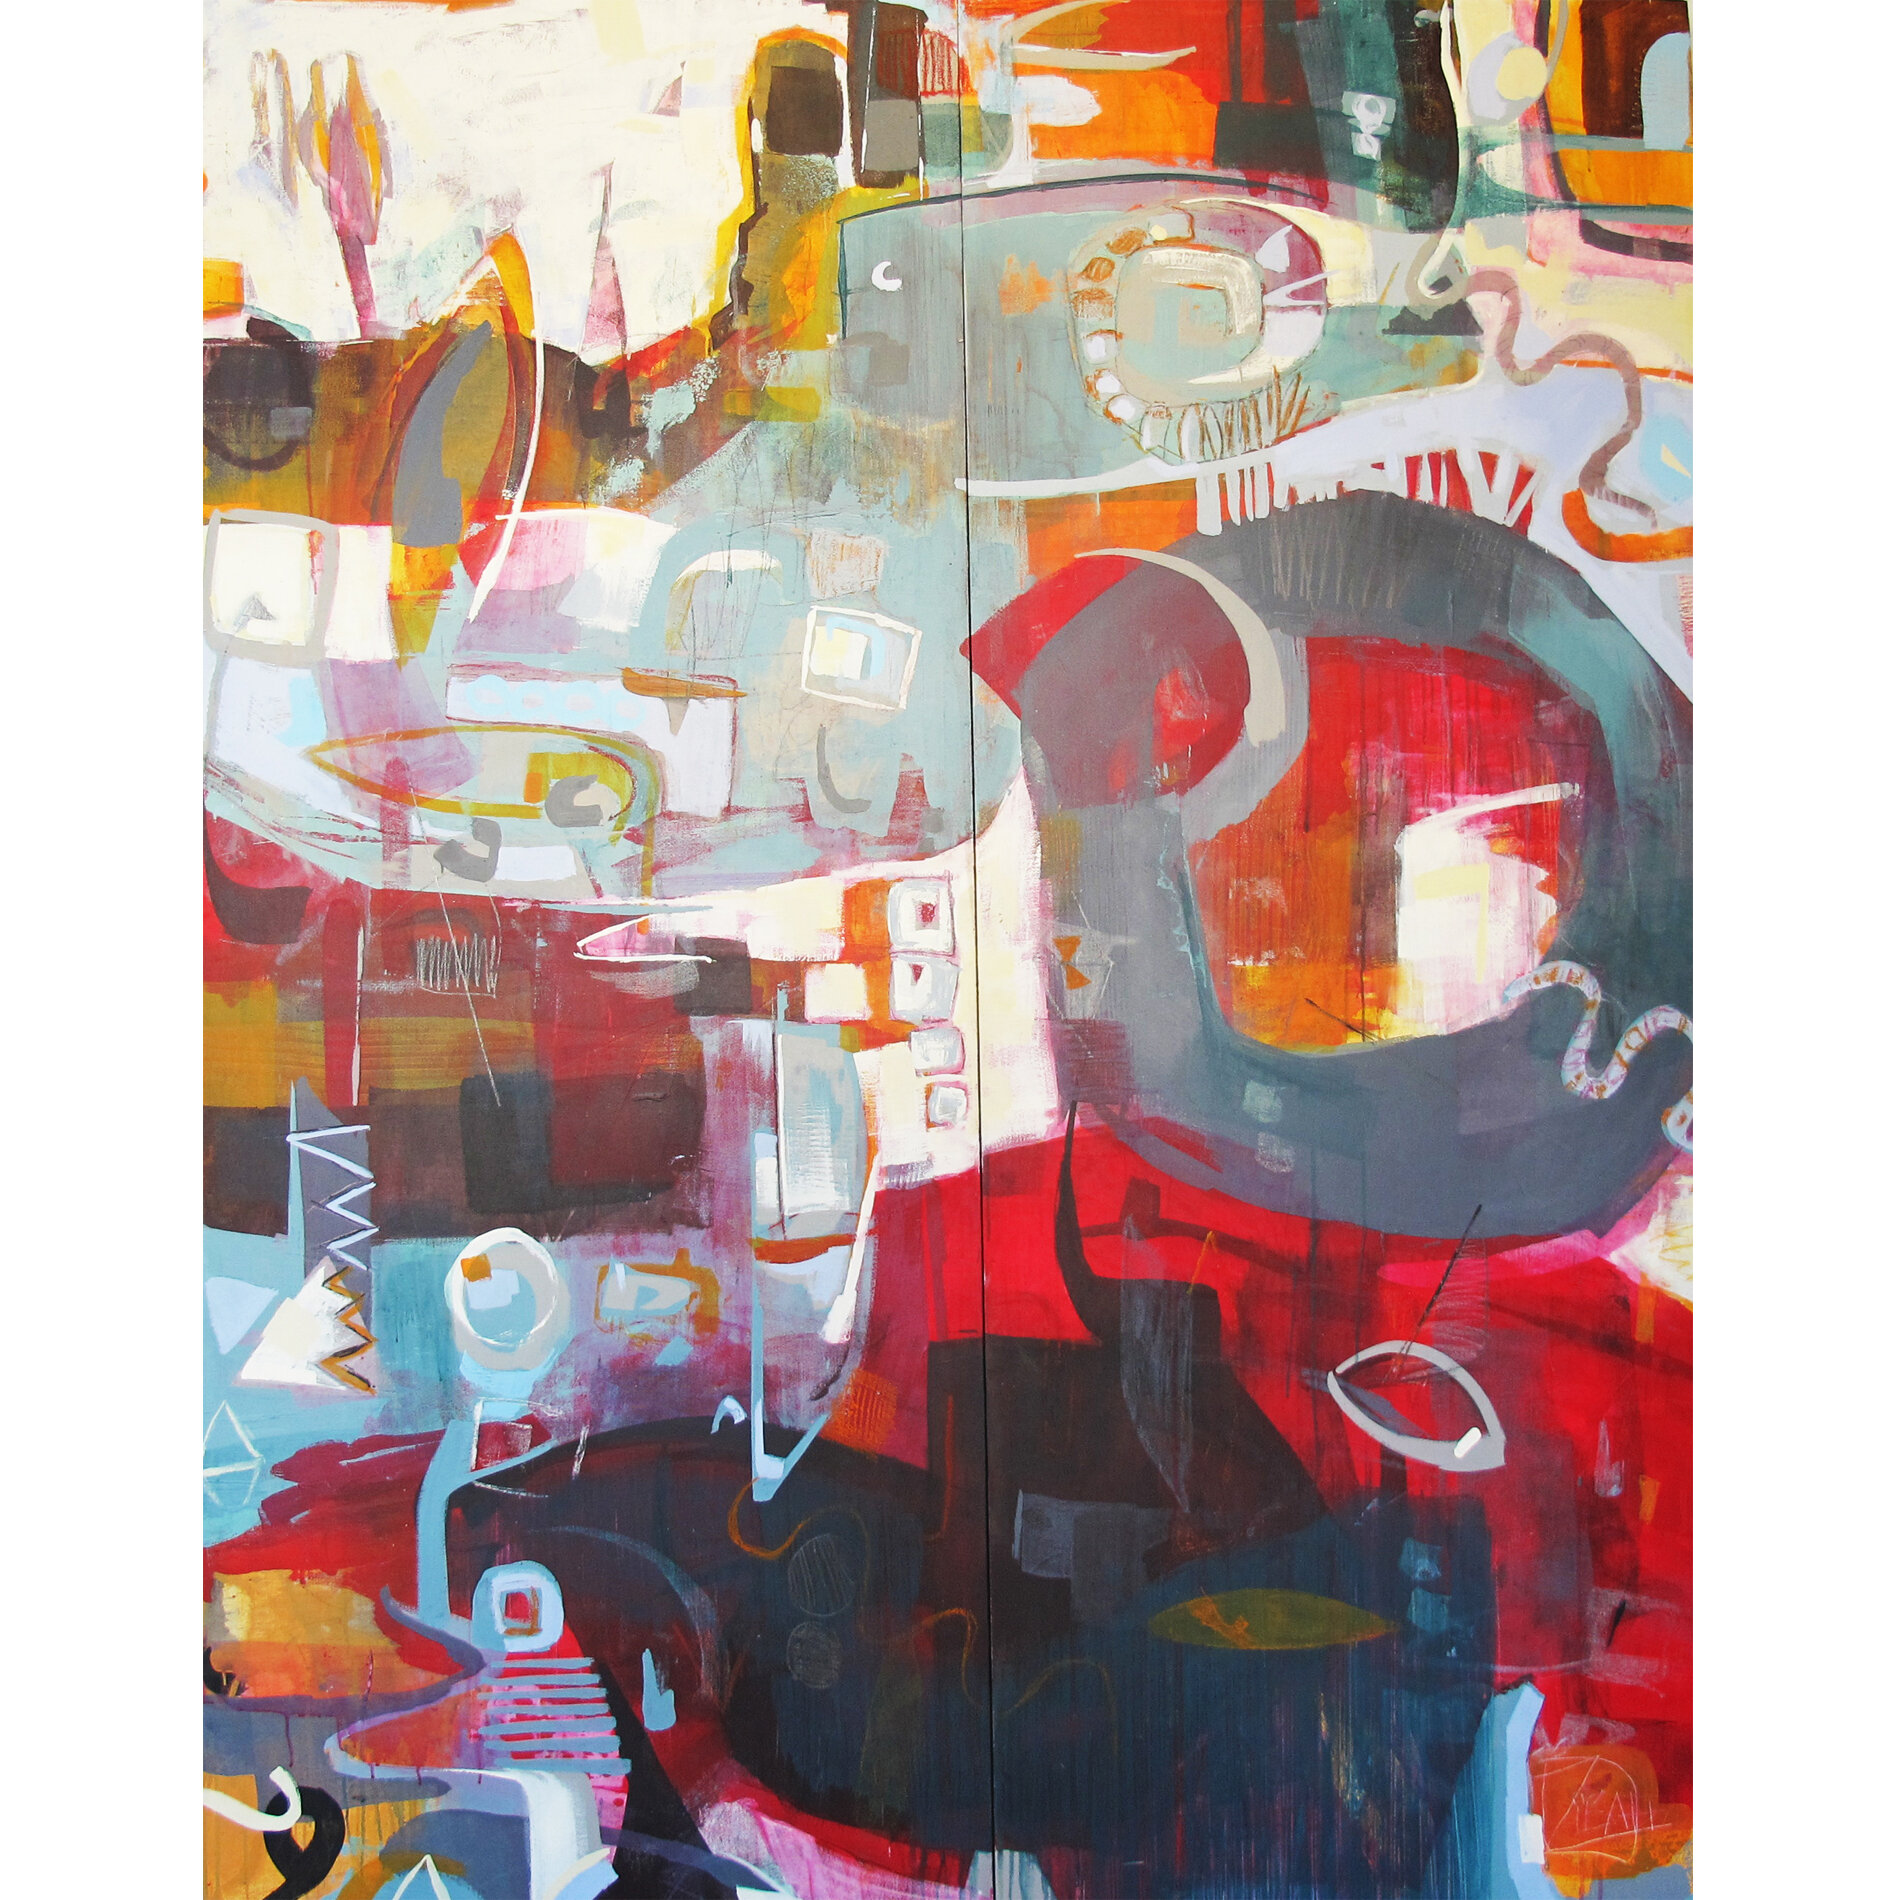 'Bright Side of the Moon', diptych 230cm x 170cm, acrylic, crayon, graphite on panel $5800.jpg